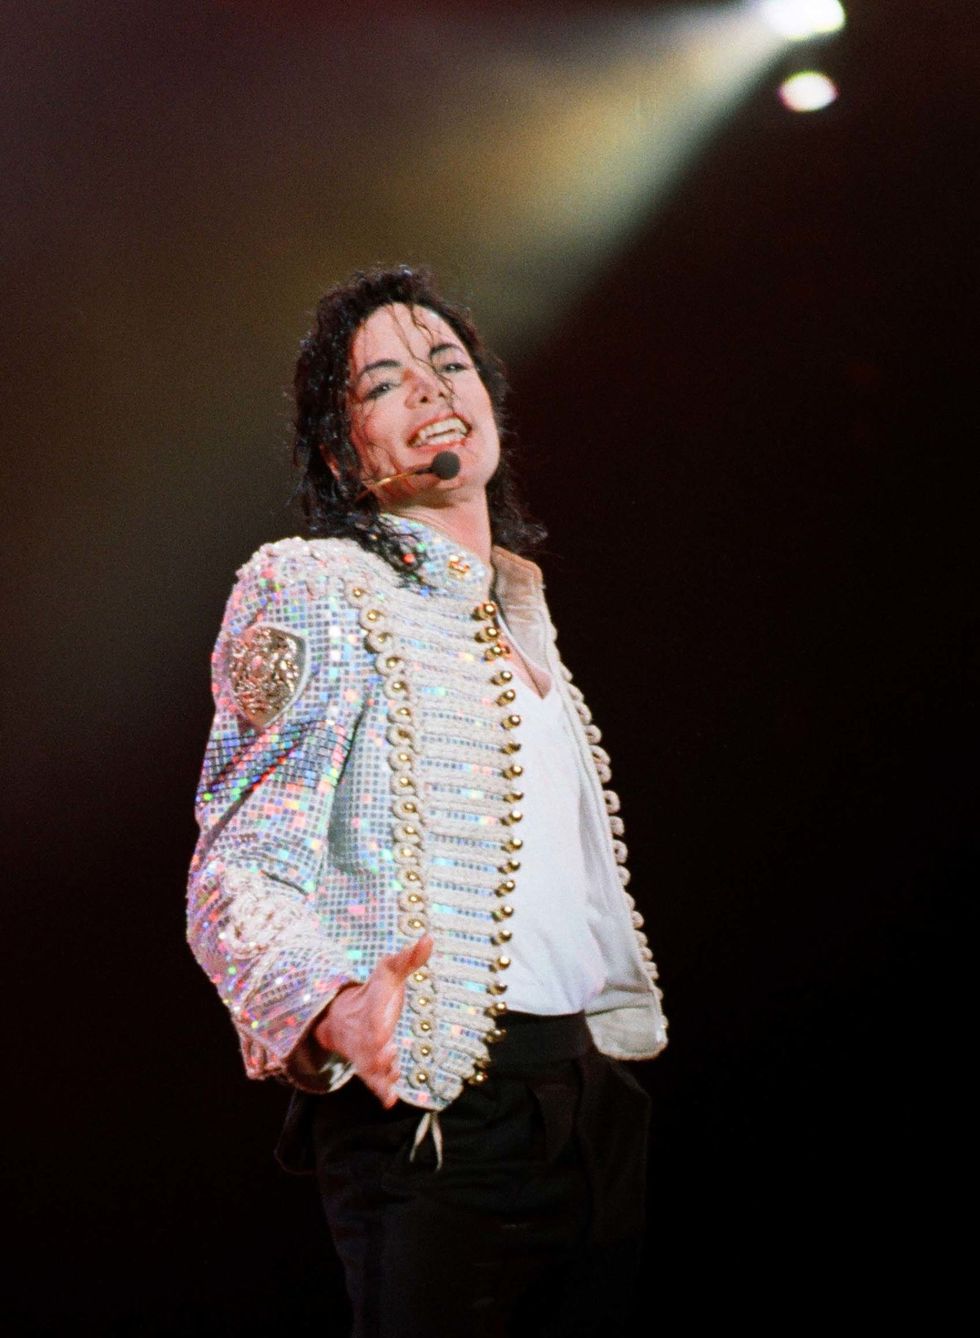 American singer Michael Jackson (1958 - 2009) performing at Wembley Stadium, London, during the HIStory World Tour, 15th July 1997. (Photo by Dave Benett/Getty Images)